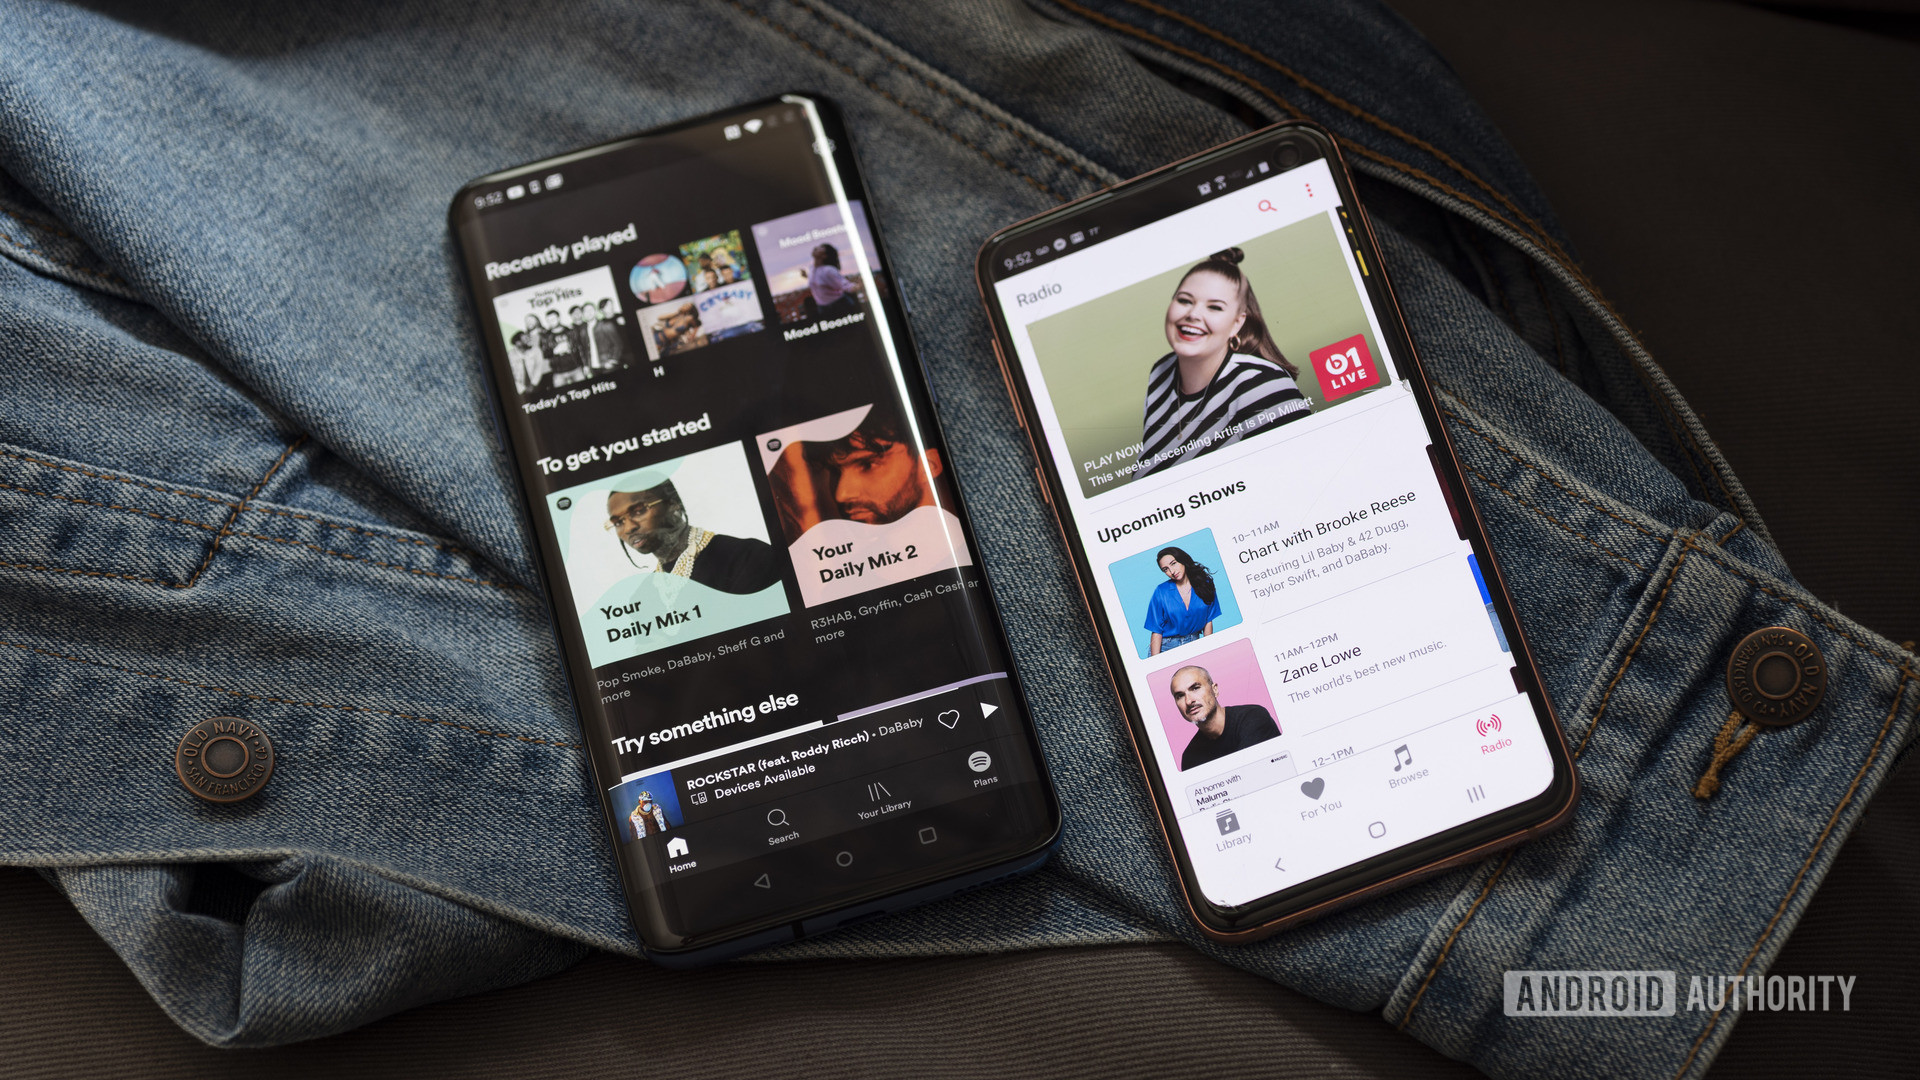 Images of Apple Music and Spotify on OnePlus 7 Pro and Samsung Galaxy S10e respectively.